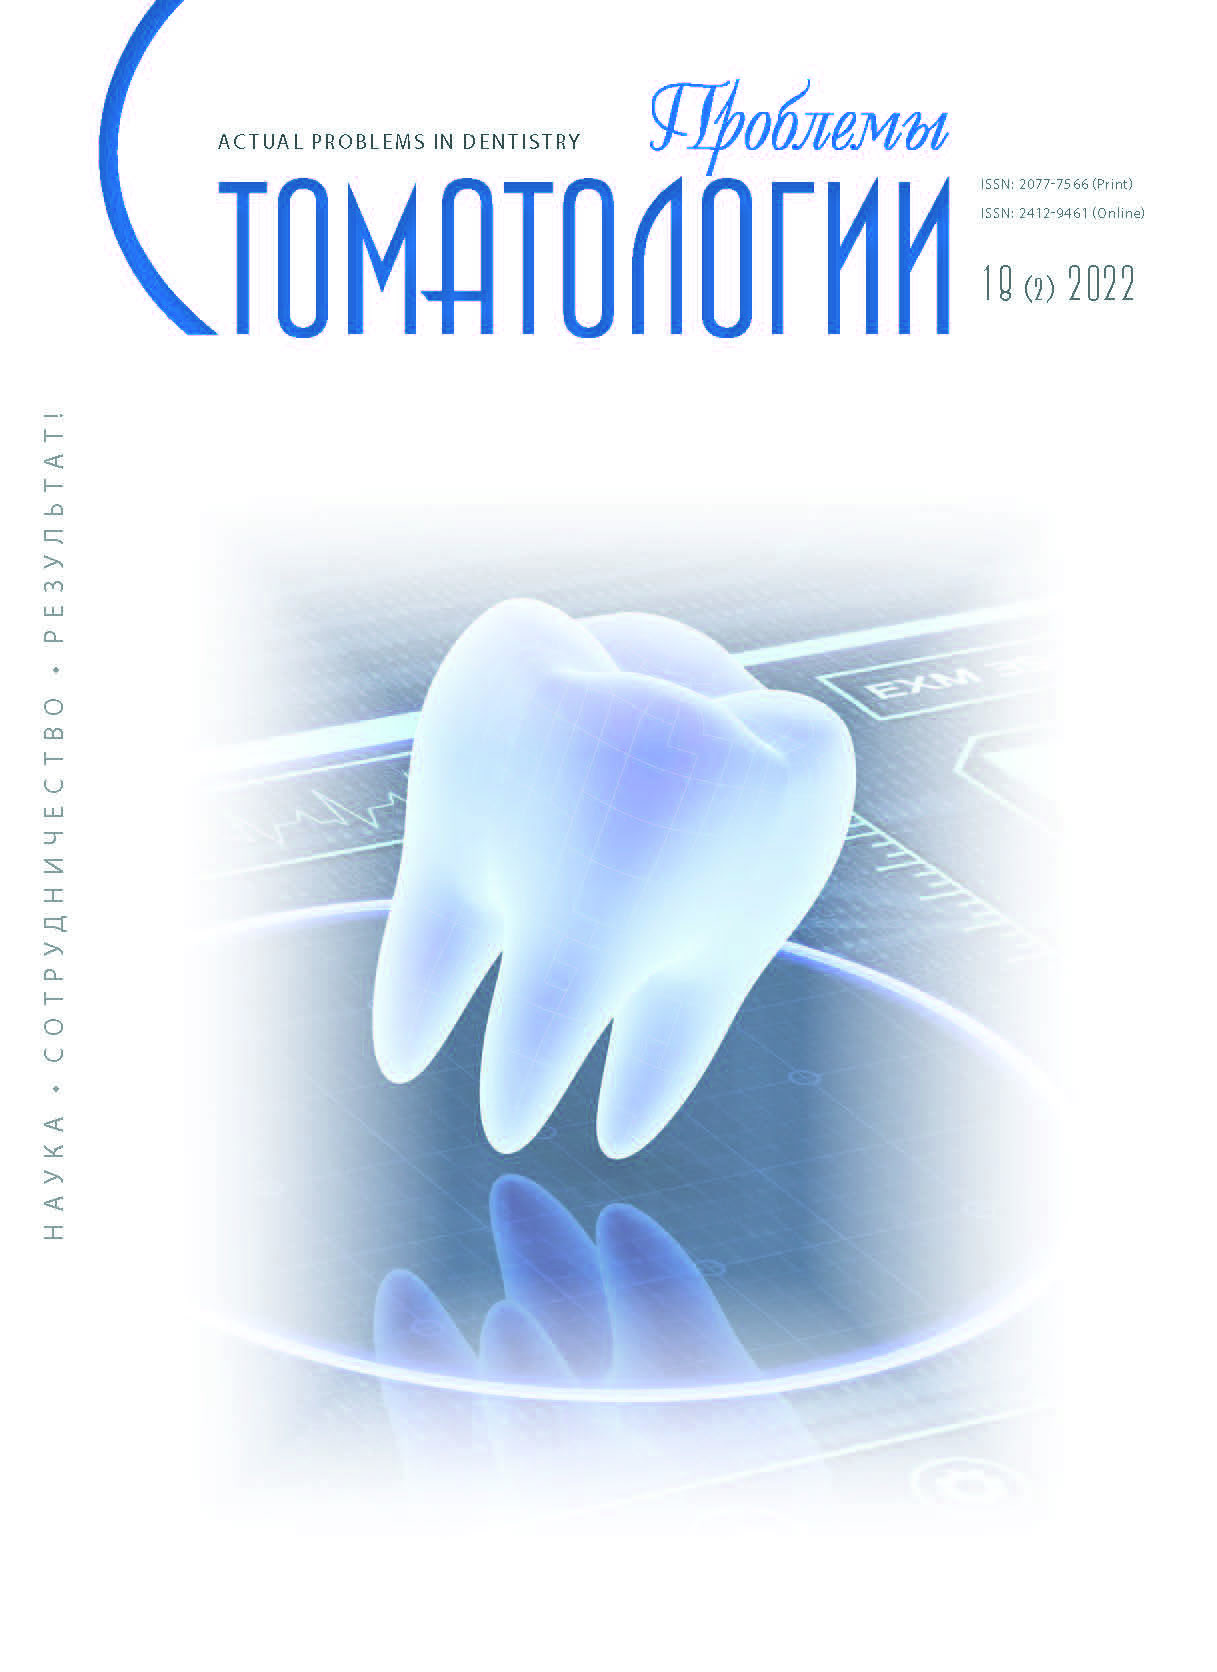                         SCREENING DEVELOPMENT OF THE APPROACH TO THE ORAL CAVITY PREPARATION FOR DENTAL IMPLANT PROSTHETICS IN ELDERLY PATIENTS
            